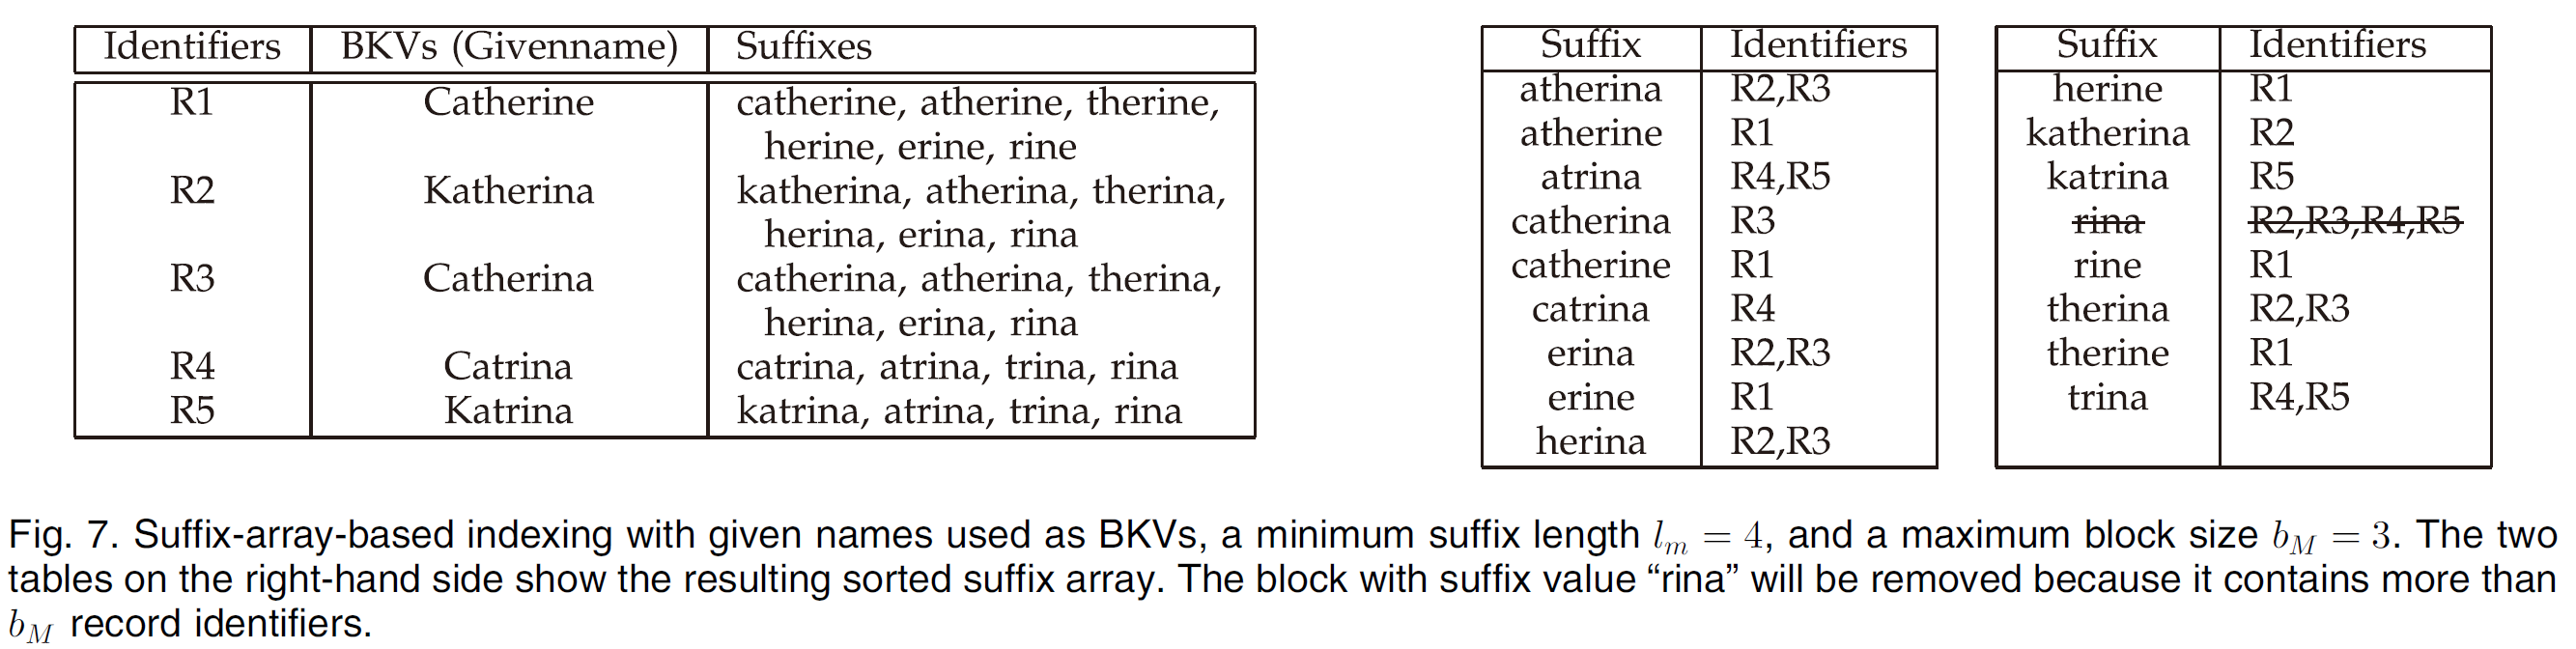 Suffix Array-Based Indexing